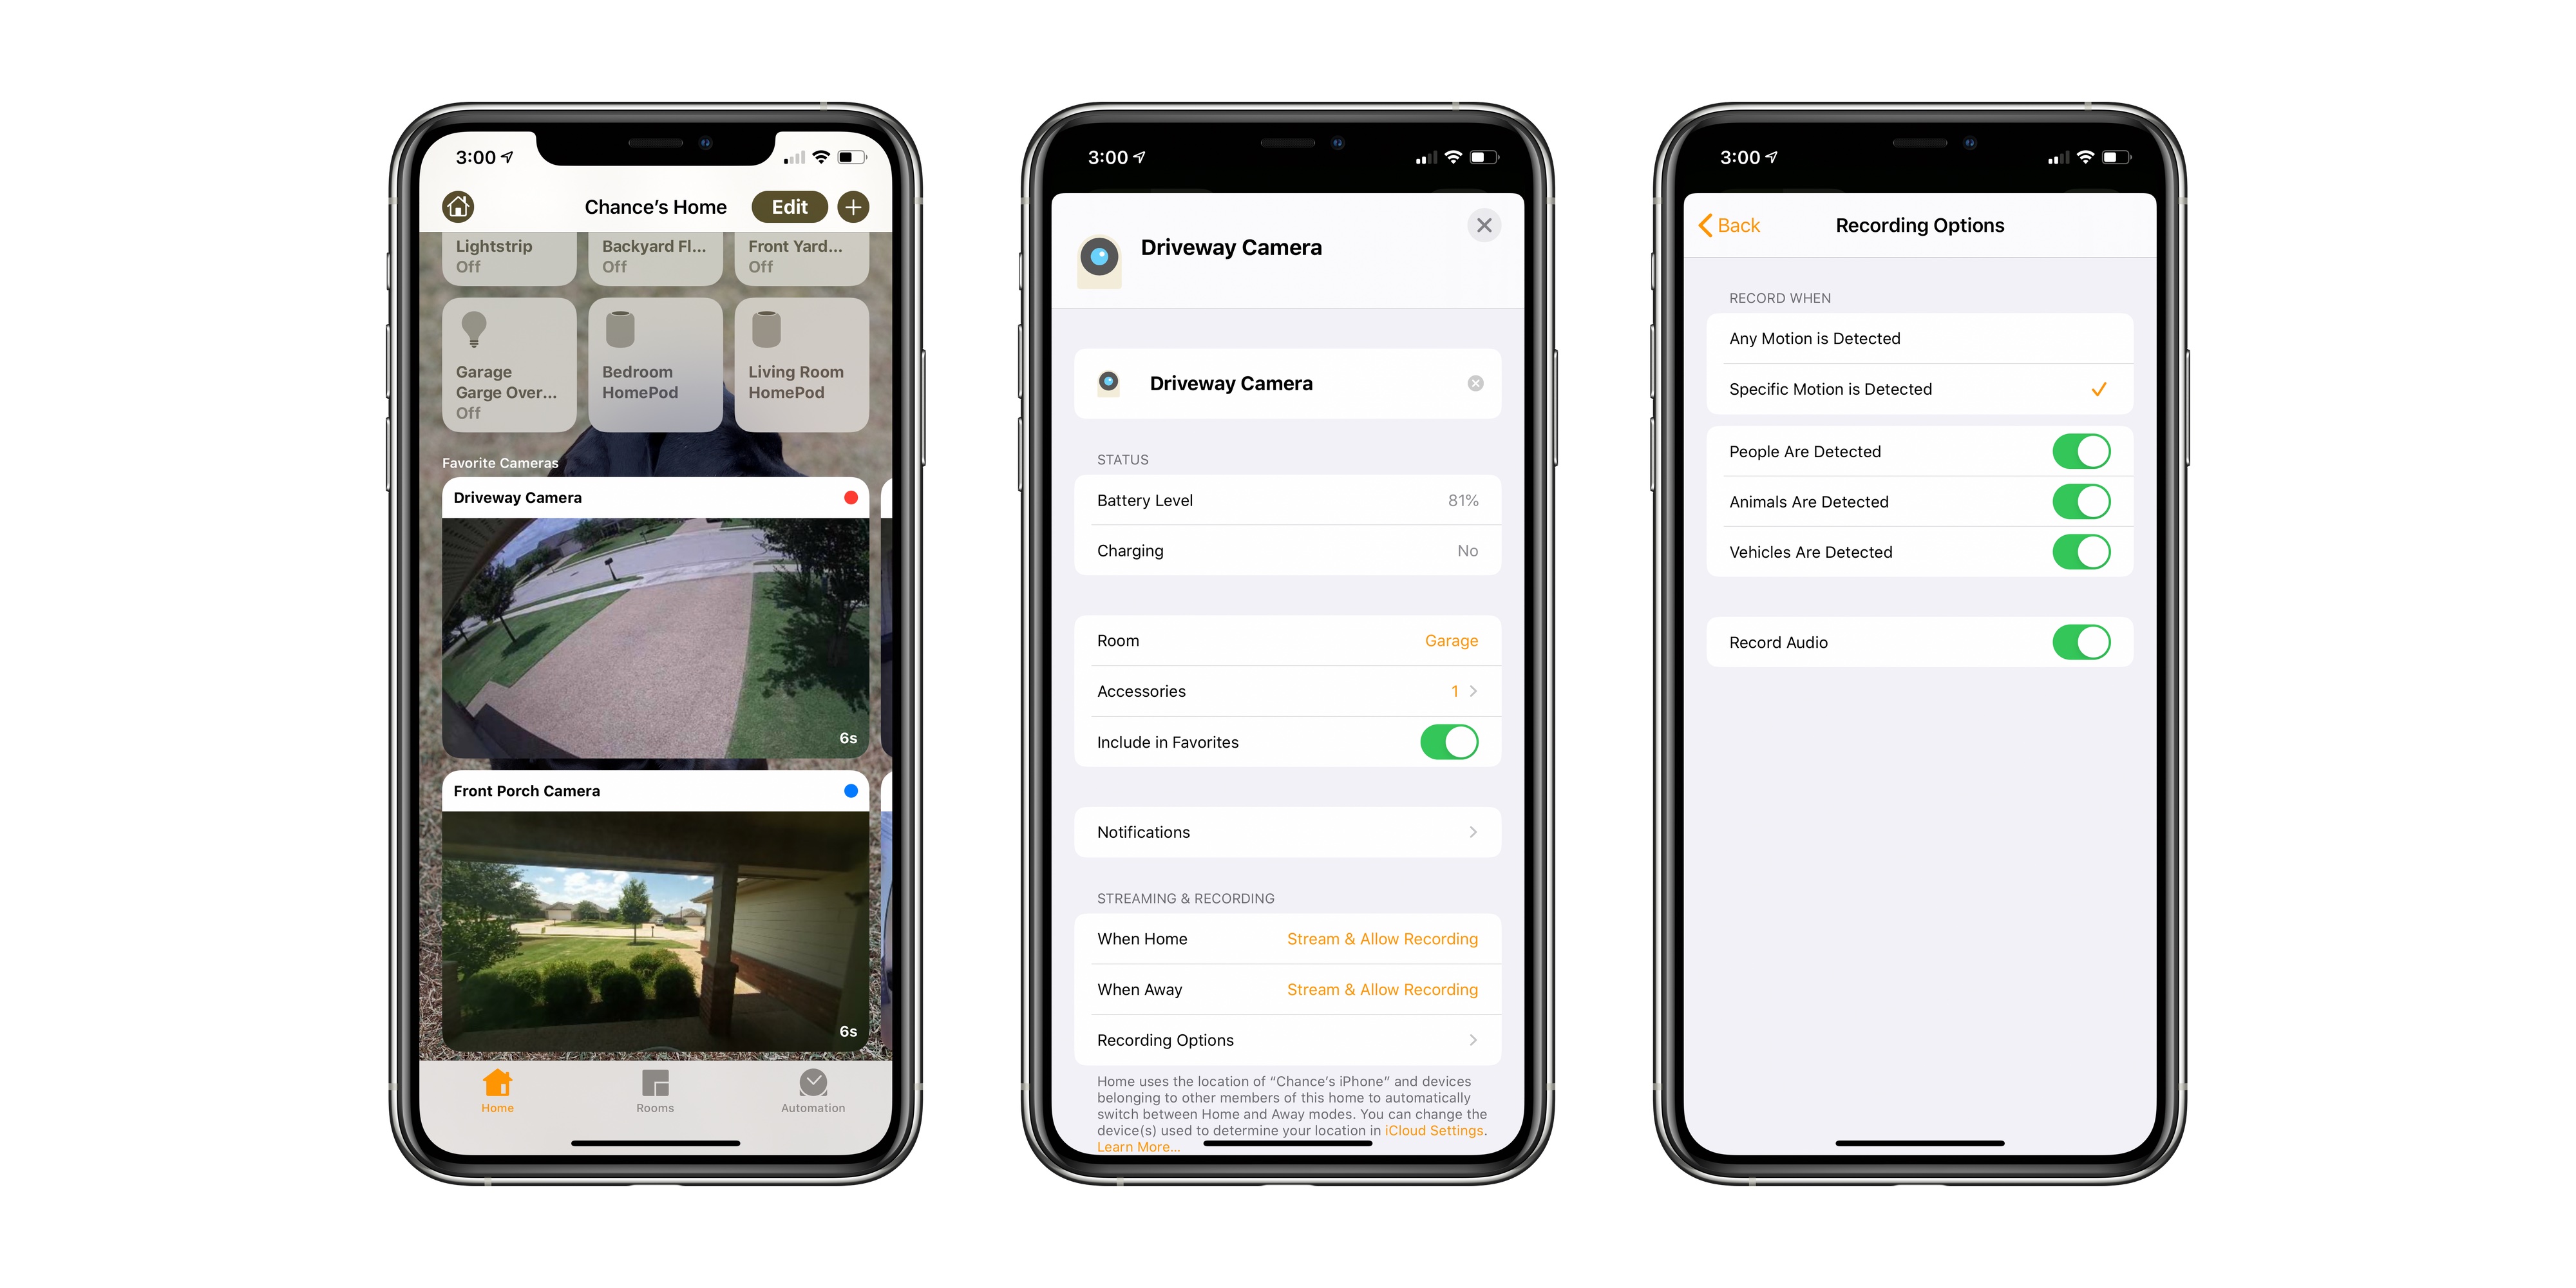 forbundet Træ T Hands-on: Eufy rolling out HomeKit Secure Video for eufyCam 2 and 2c -  9to5Mac